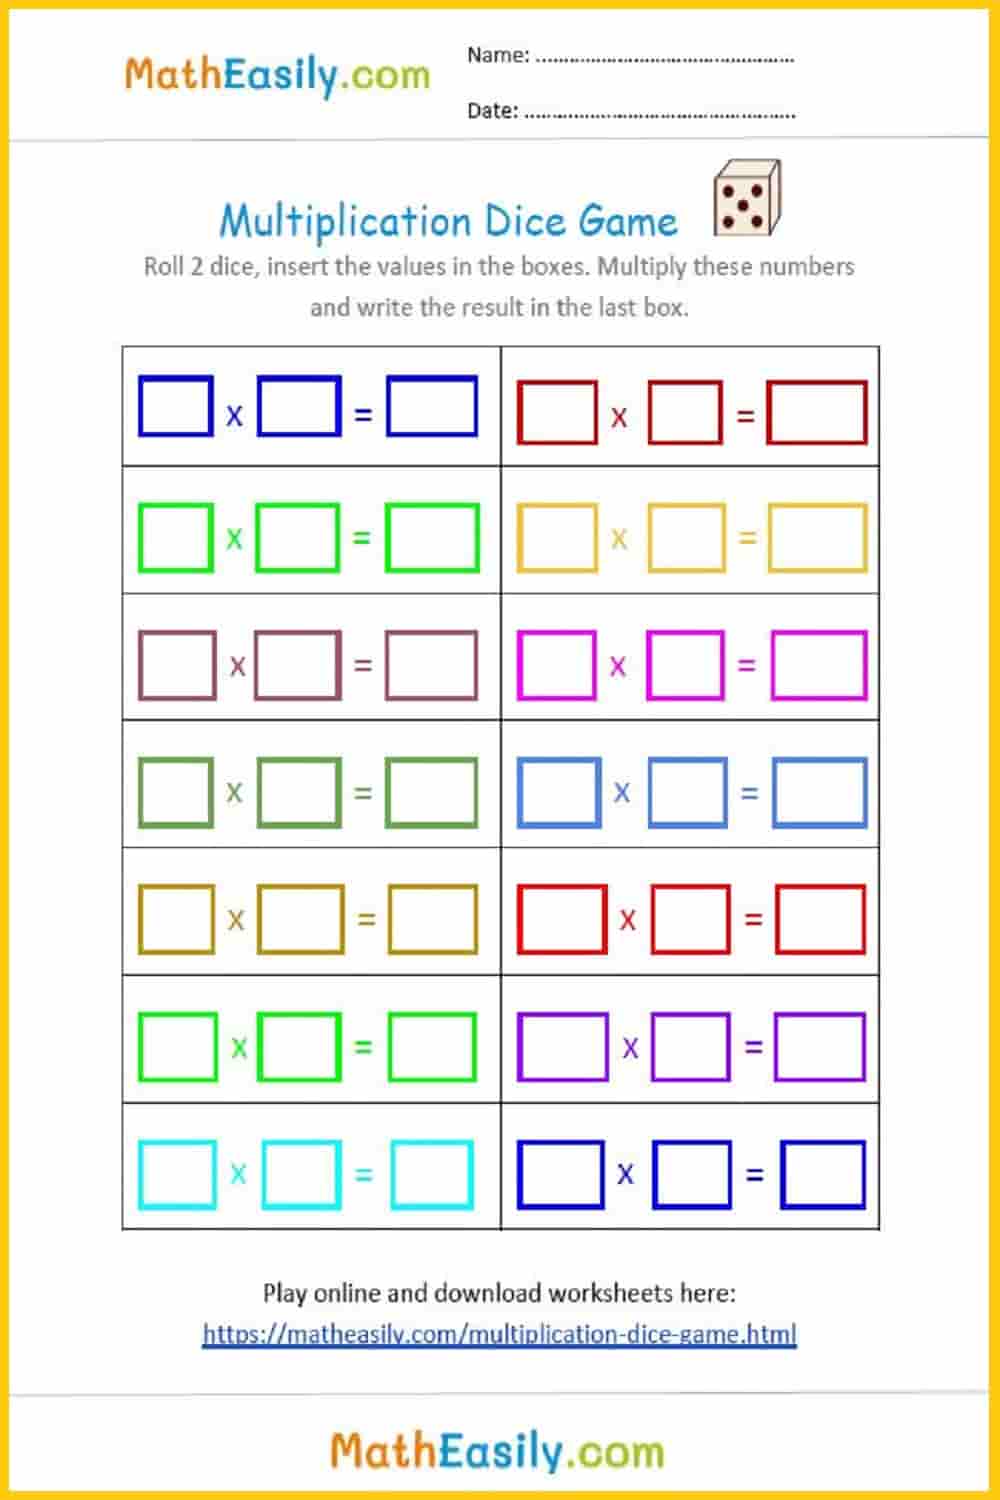 Blank multiplication dice game. Dice multiplication worksheet PDF: Download free multiplication dice games printable. 
multiplication dice game pdf. free printable math dice games pdf. Free multiplication games with dice.